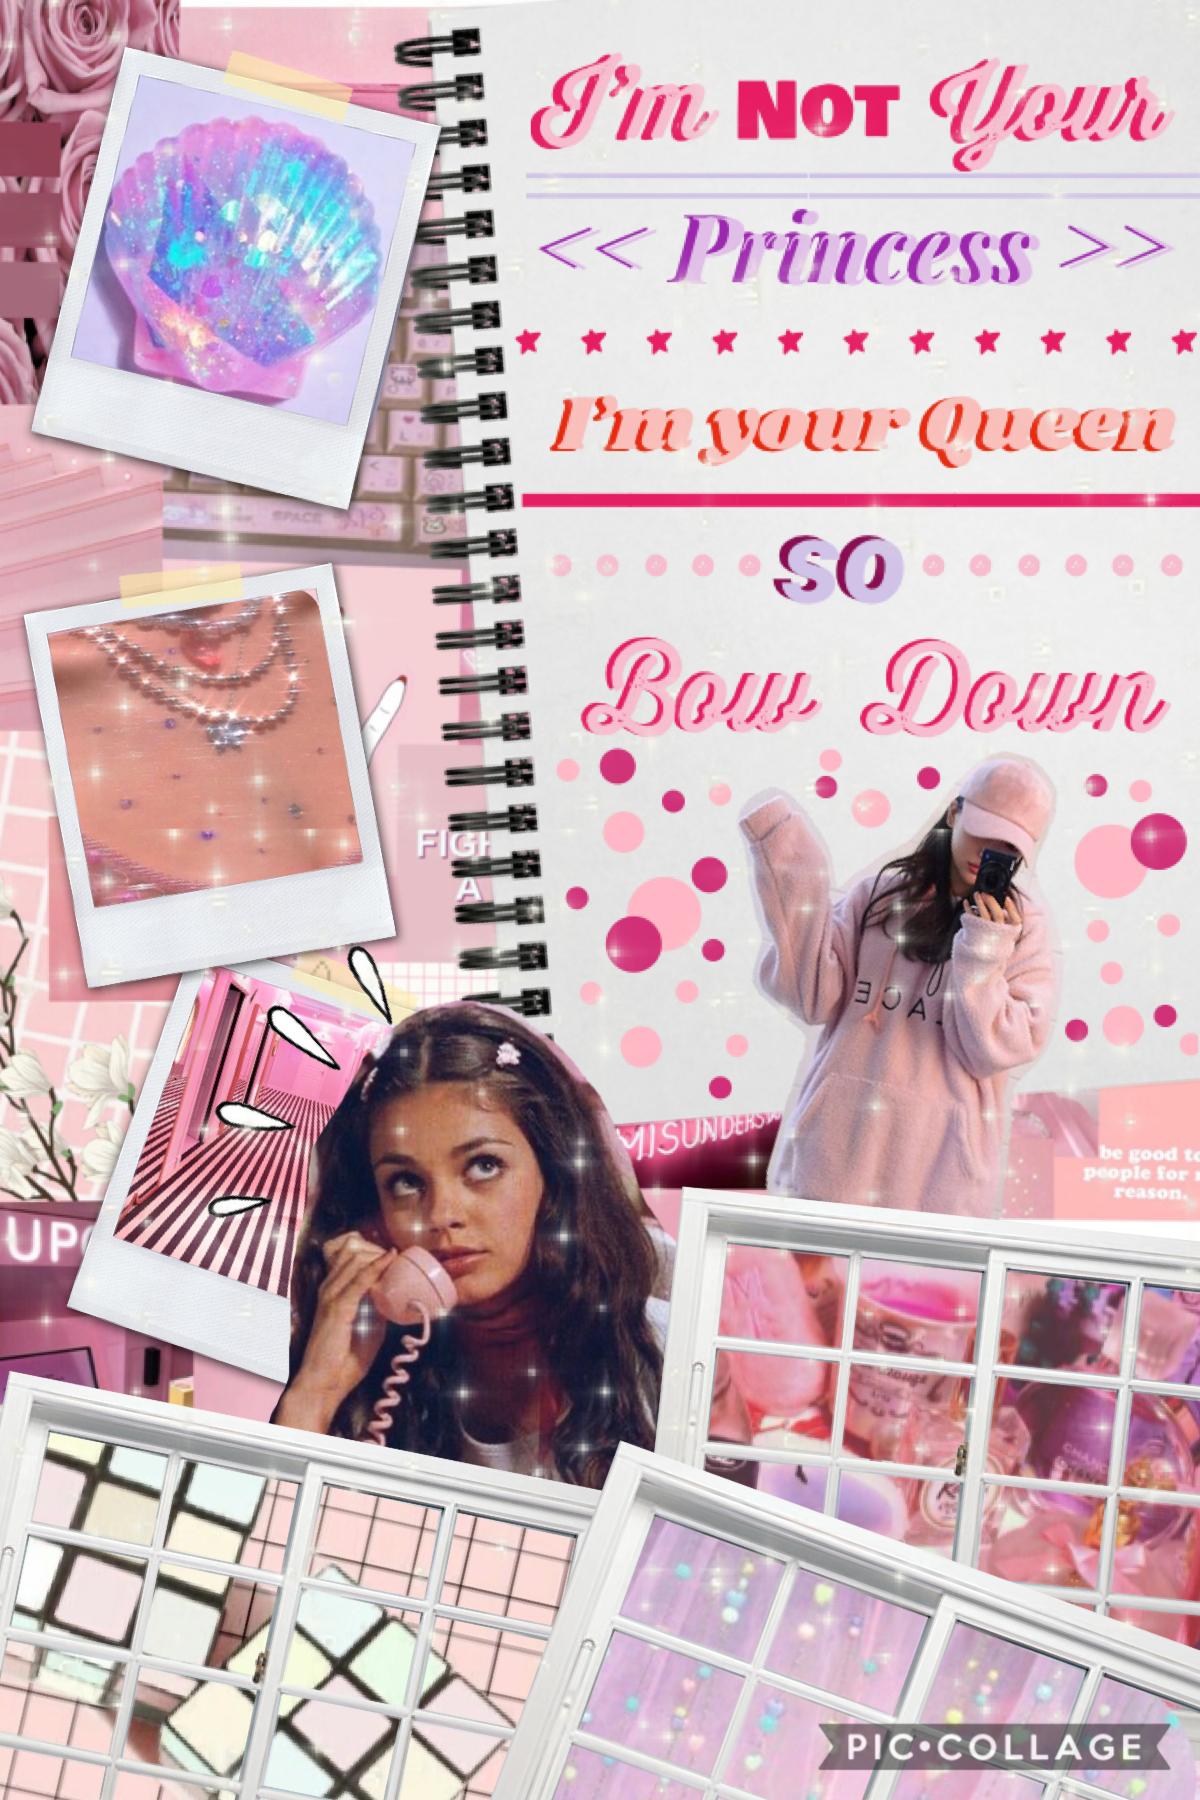 💕 tap 💕

Hey, This is the collage representing girl power I think I’ll do a inspirational one next

Btw I made this instead of doing online work 😬